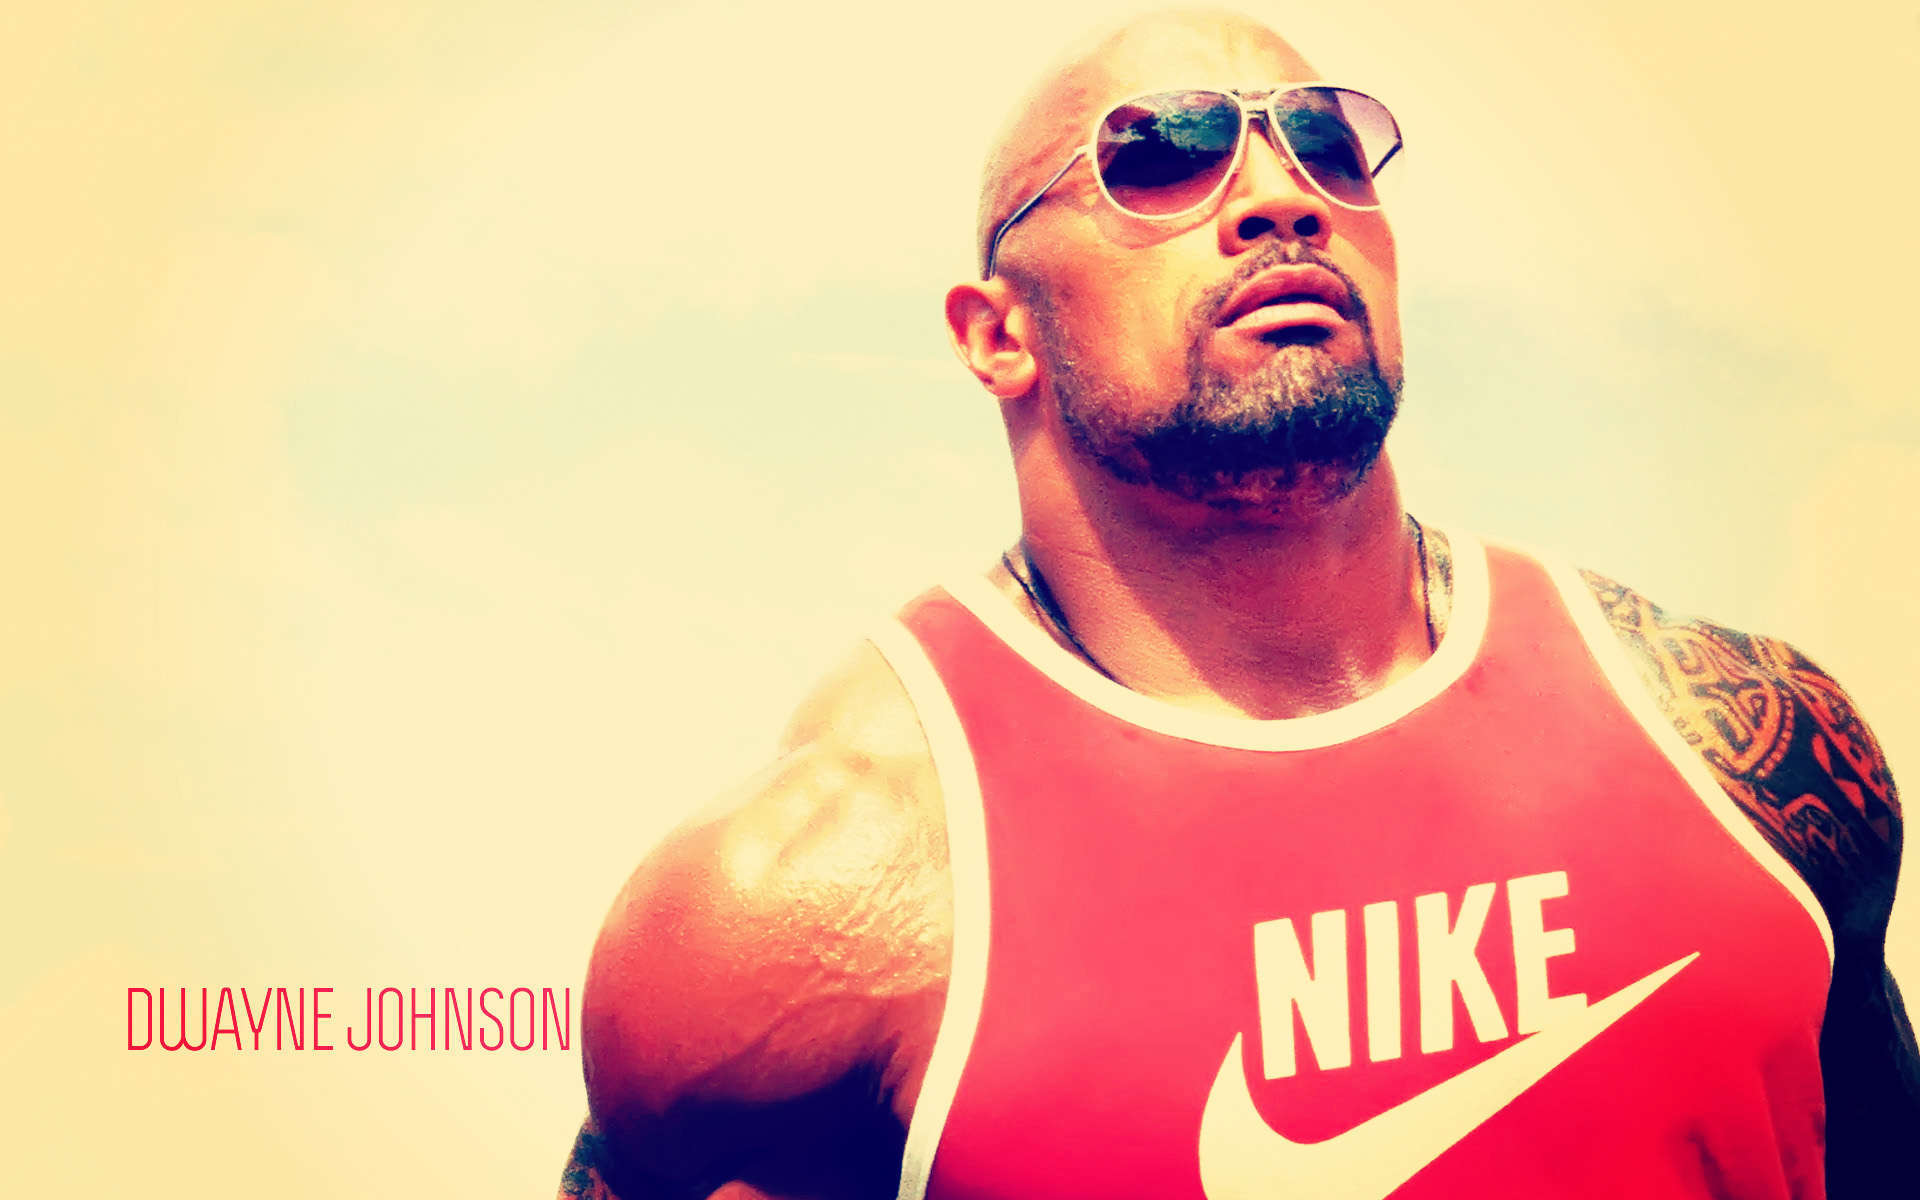 Dwayne Johnson The Rock Wallpapers Pictures Photos Images | Chainimage